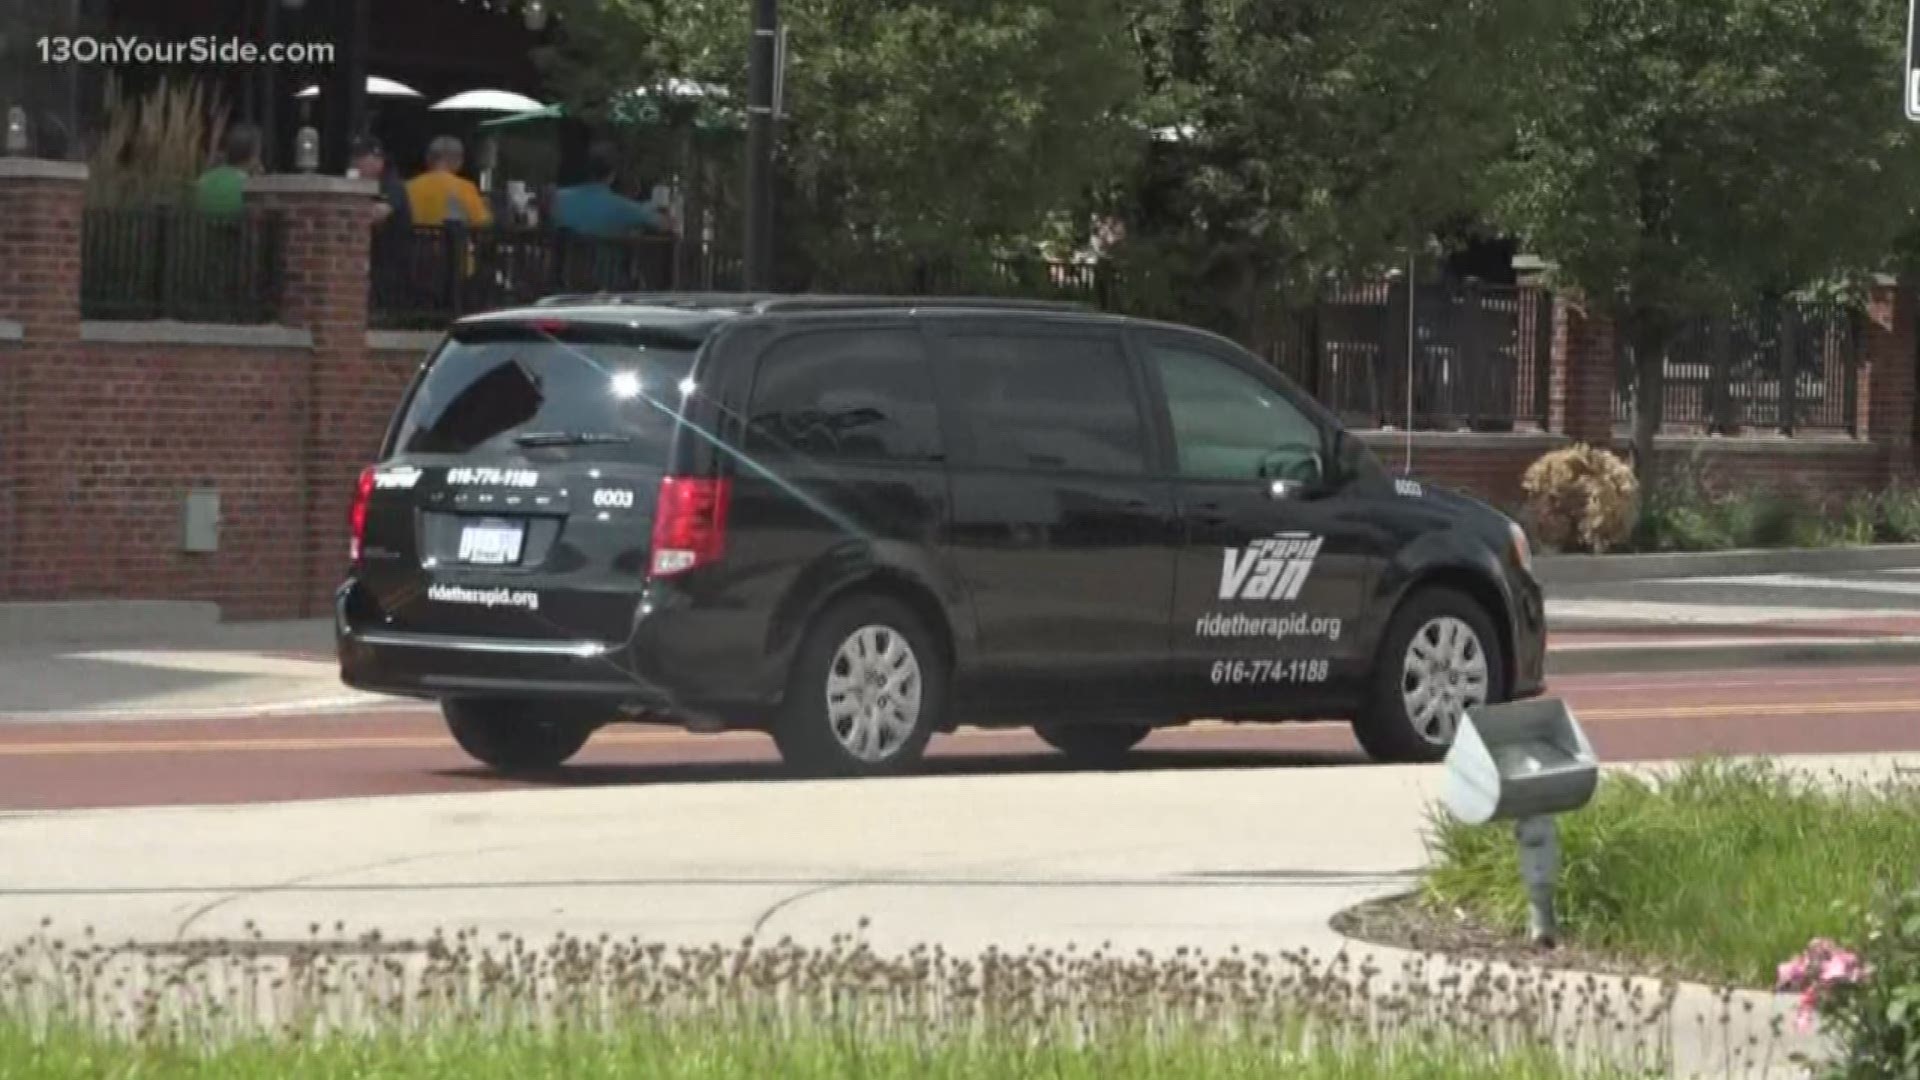 West Michigan Rideshare's vanpooling program has actually been around for awhile now, but The Rapid is renewing its efforts to teach people about the benefits.